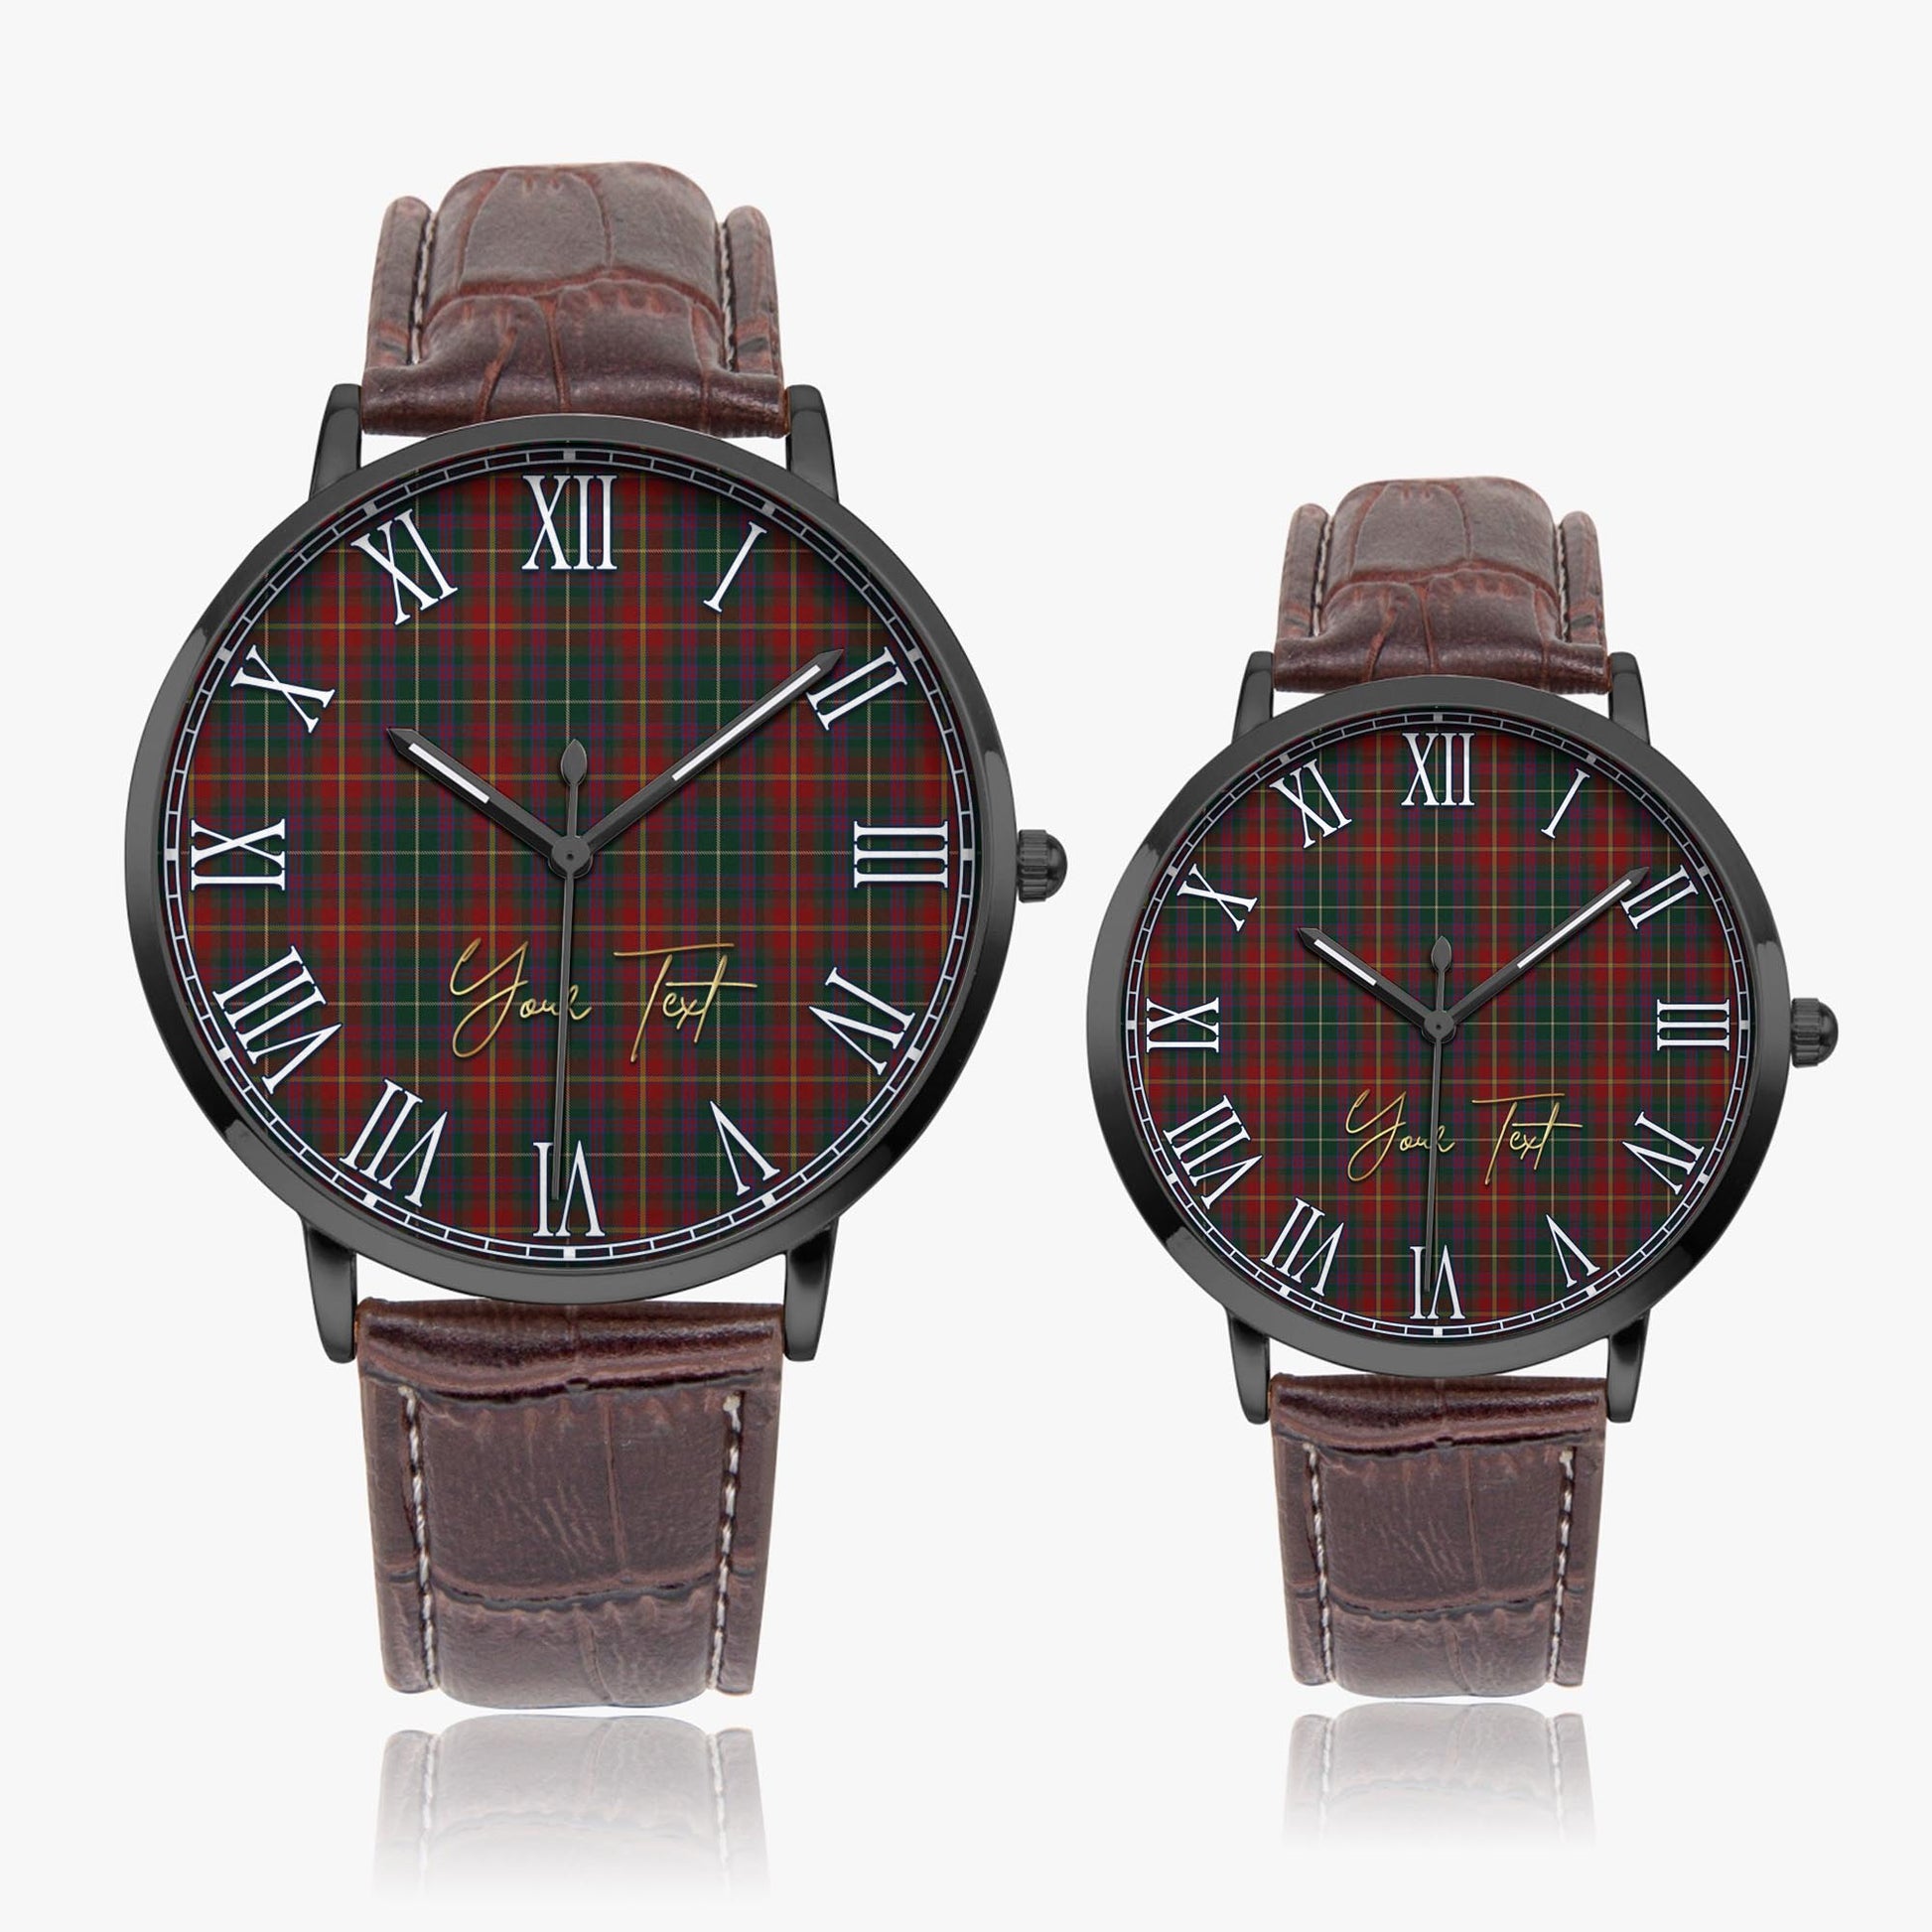 Meath County Ireland Tartan Personalized Your Text Leather Trap Quartz Watch Ultra Thin Black Case With Brown Leather Strap - Tartanvibesclothing